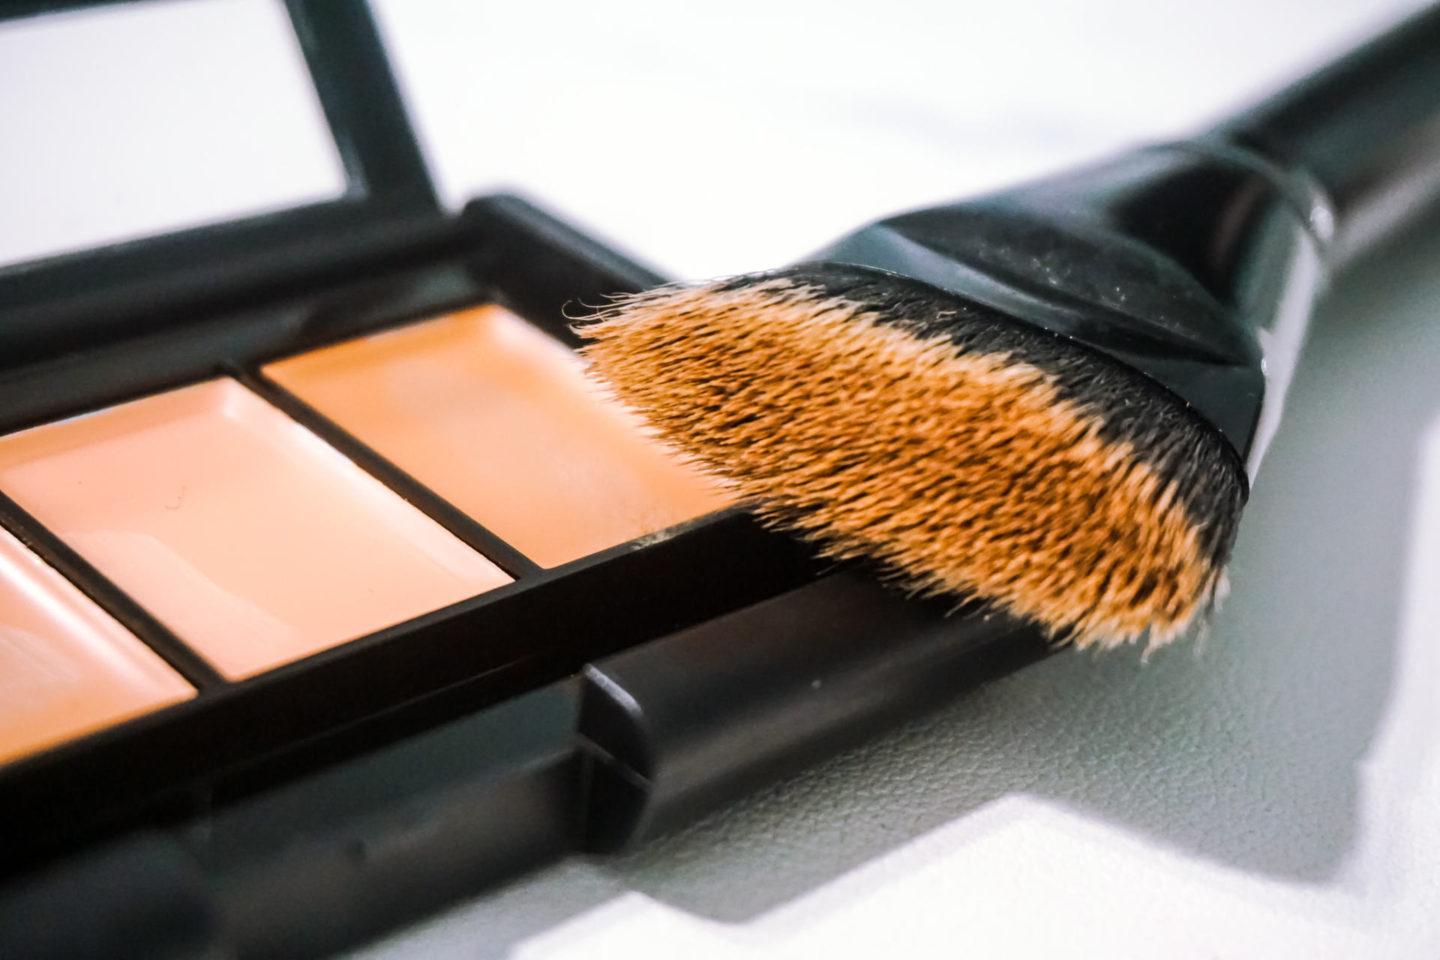 Beauty Pick of the Month: The e.l.f Contour Brush